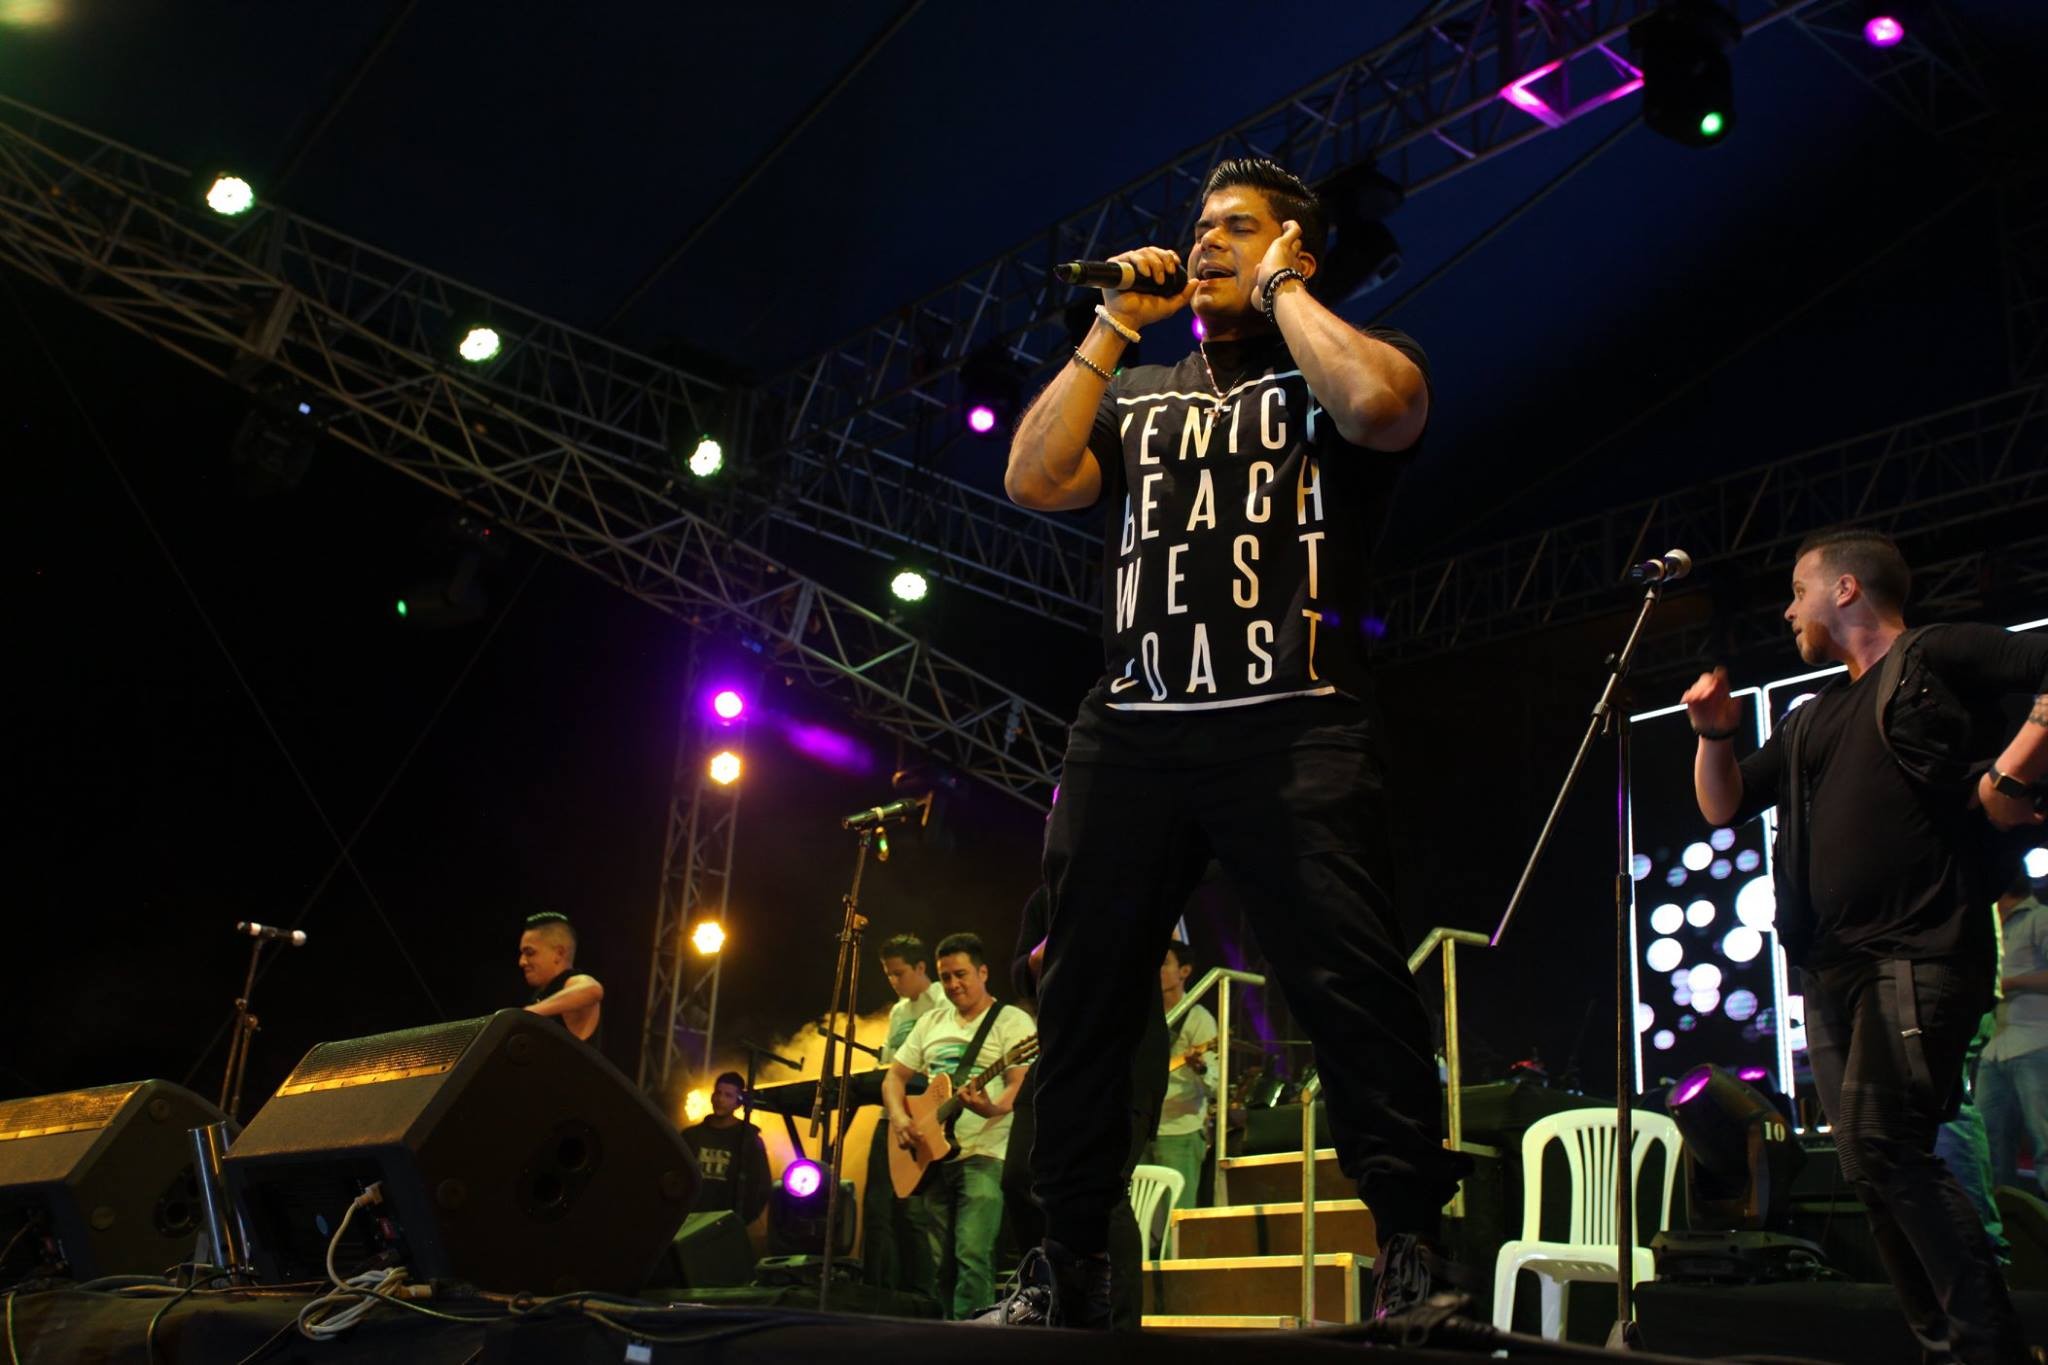 Puerto Rican salsa singer Jerry Rivera will hold Pulse benefit concert